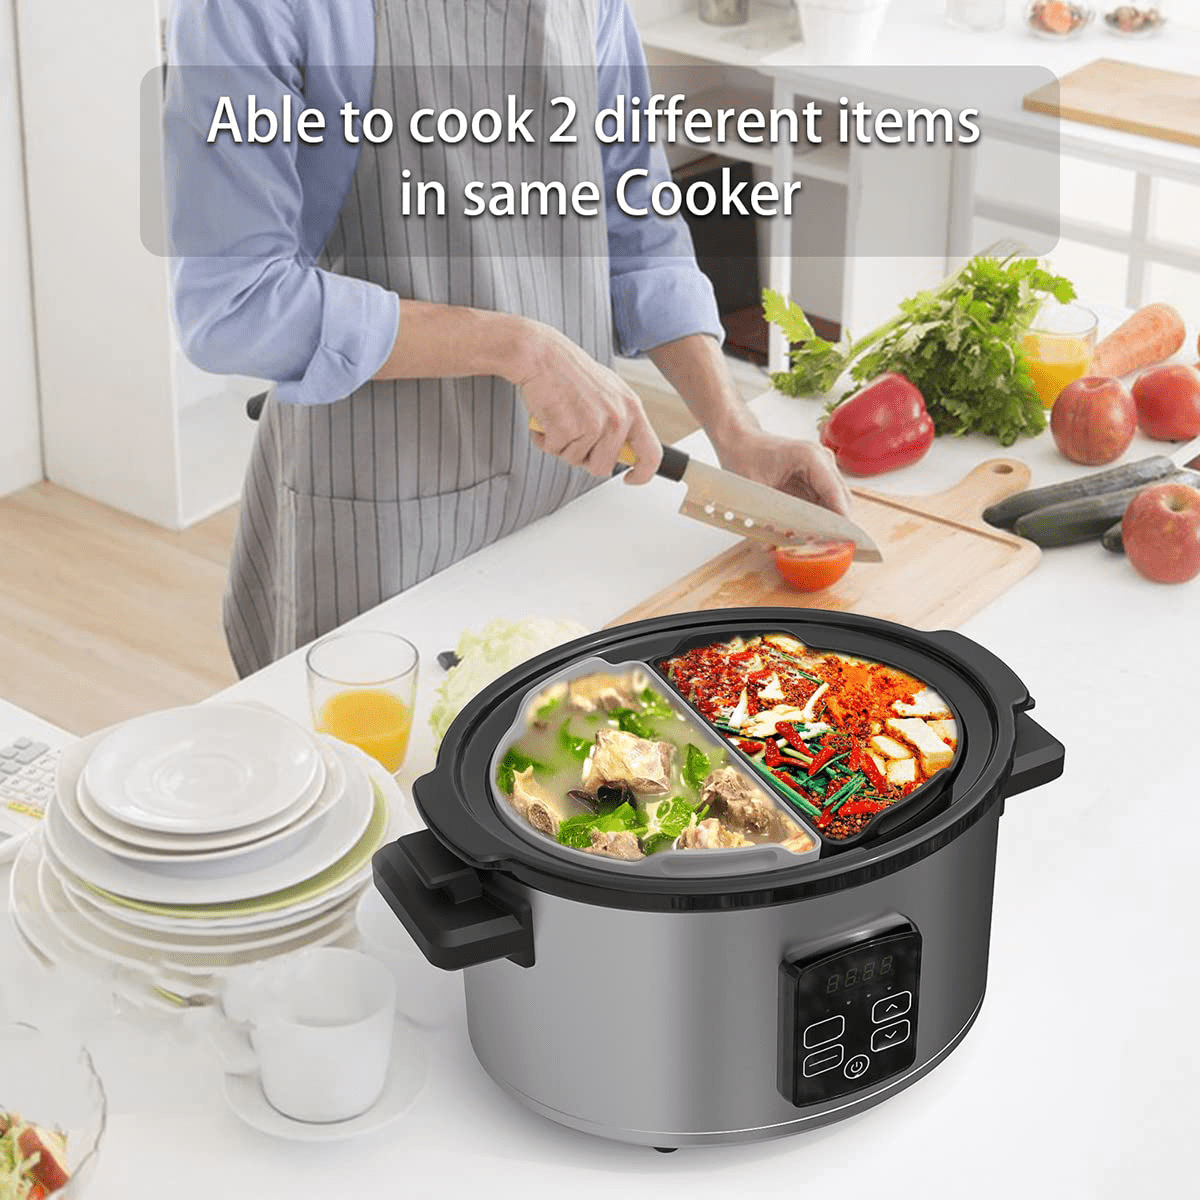 SILICONE KITCHEN ACCESSORIES Slow Cooker Divider Insert Cooking Liner  CrockPot $18.98 - PicClick AU